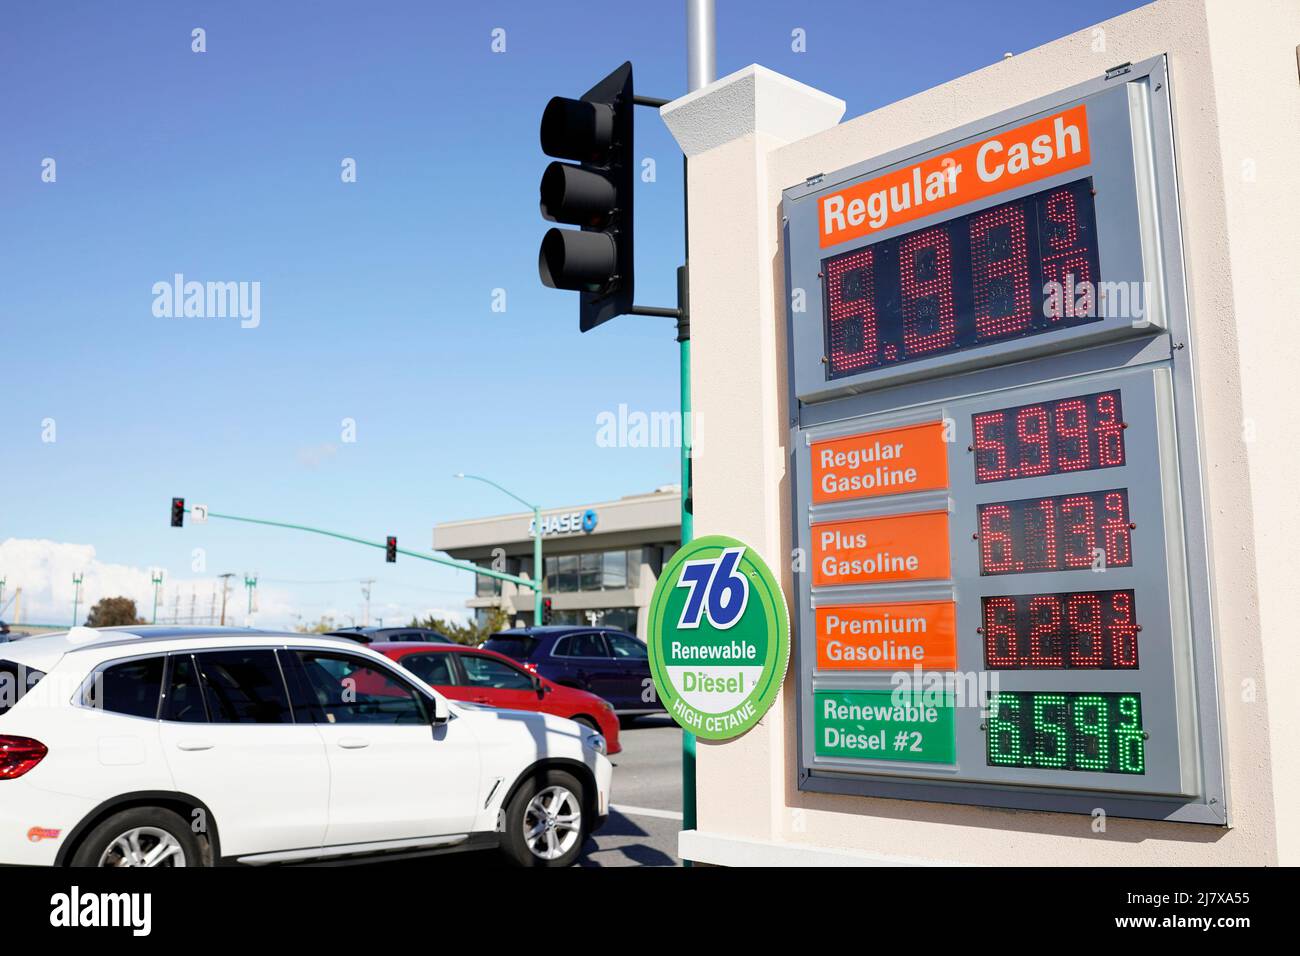 (220511) -- MILLBRAE, May 11, 2022 (Xinhua) -- Gasoline and diesel prices are displayed at a gas station in Millbrae, California, the United States, May 10, 2022. The national average prices for regular gasoline and diesel in the United States both climbed to fresh record highs Tuesday. According to the American Automobile Association (AAA), which provides the latest gas price analysis based on data from 130,000 gas stations nationwide, the regular gas price rose four cents on Tuesday to 4.37 U.S. dollars a gallon, overtaking the prior record of 4.33 dollars on March 11. (Photo by Li Jianguo Stock Photo